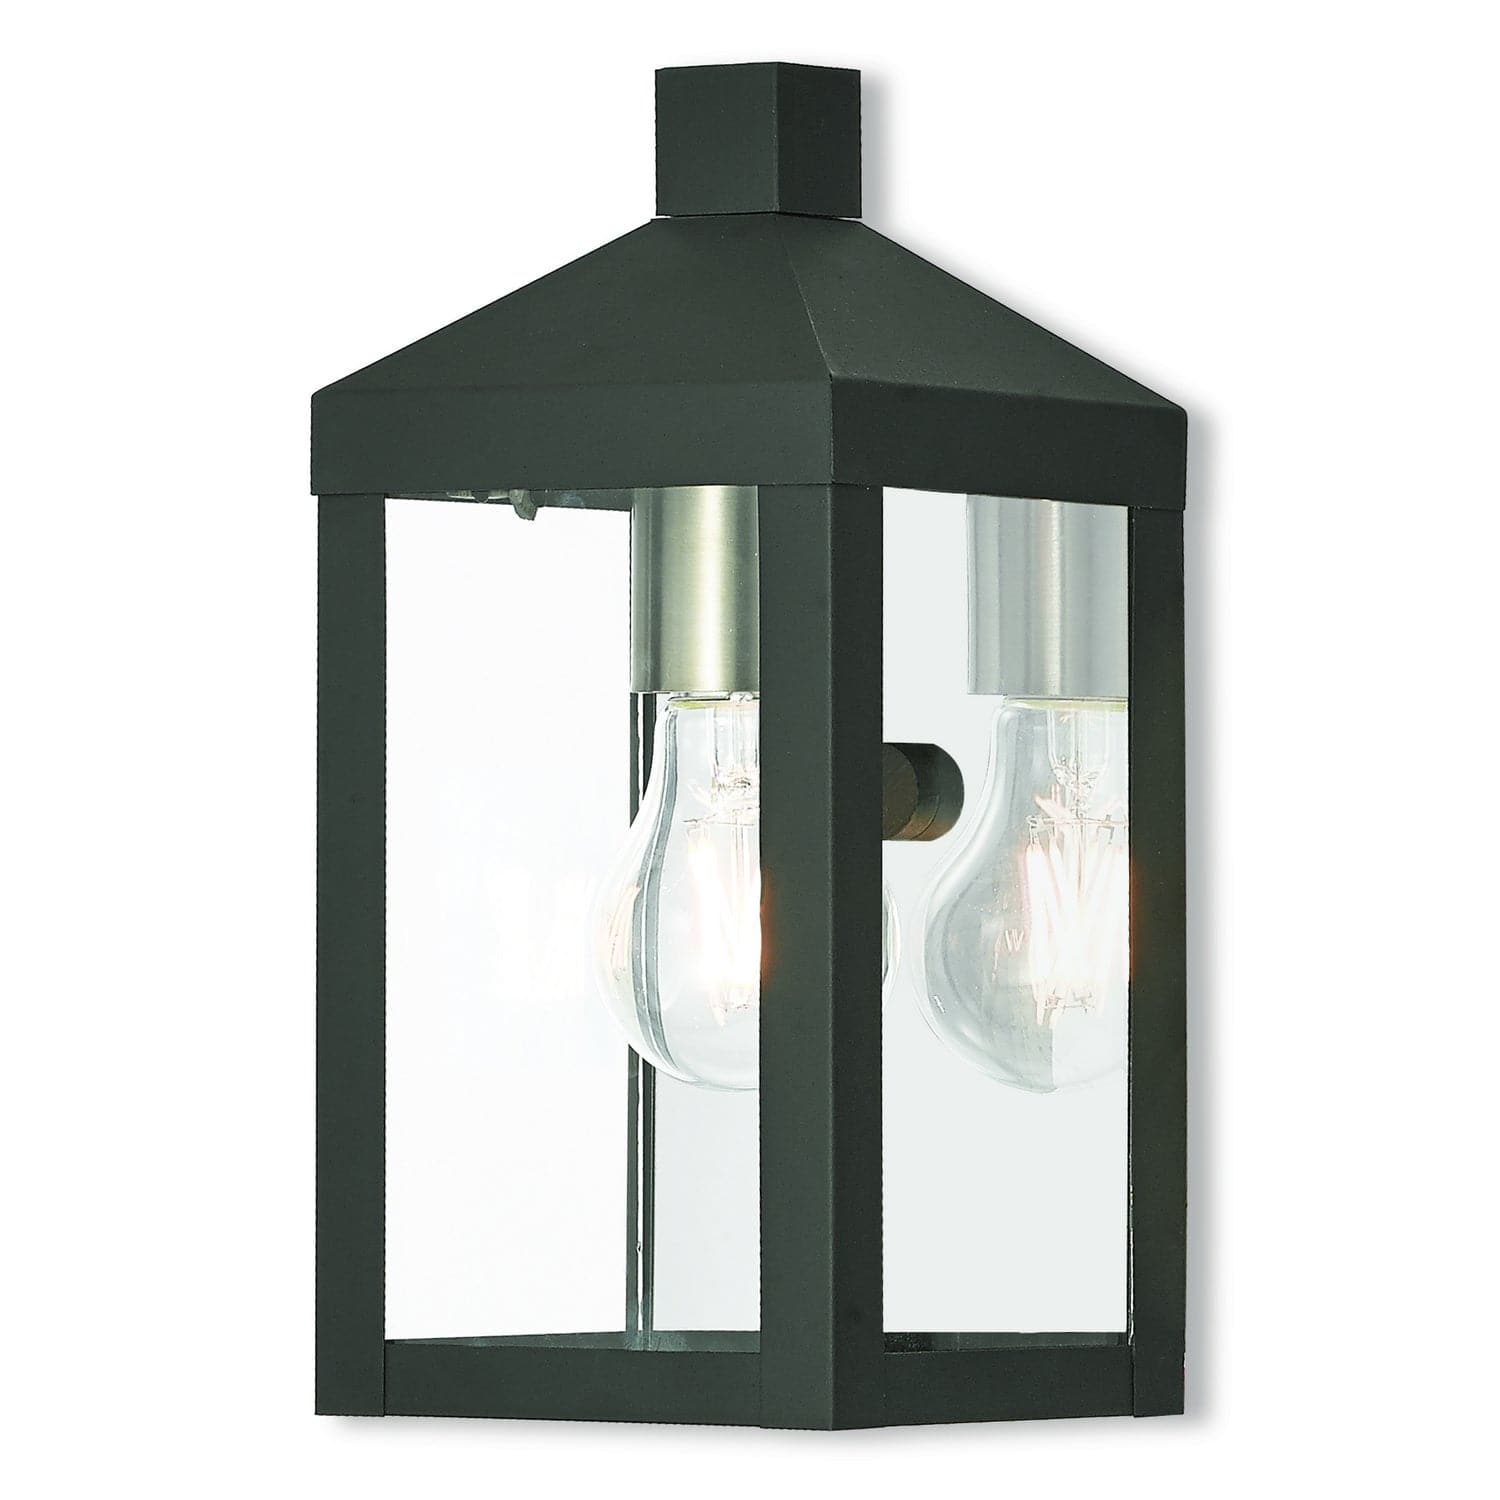 Livex Lighting - 20581-04 - One Light Outdoor Wall Lantern - Nyack - Black w/ Brushed Nickel Cluster and Polished Chrome Stainless Steel